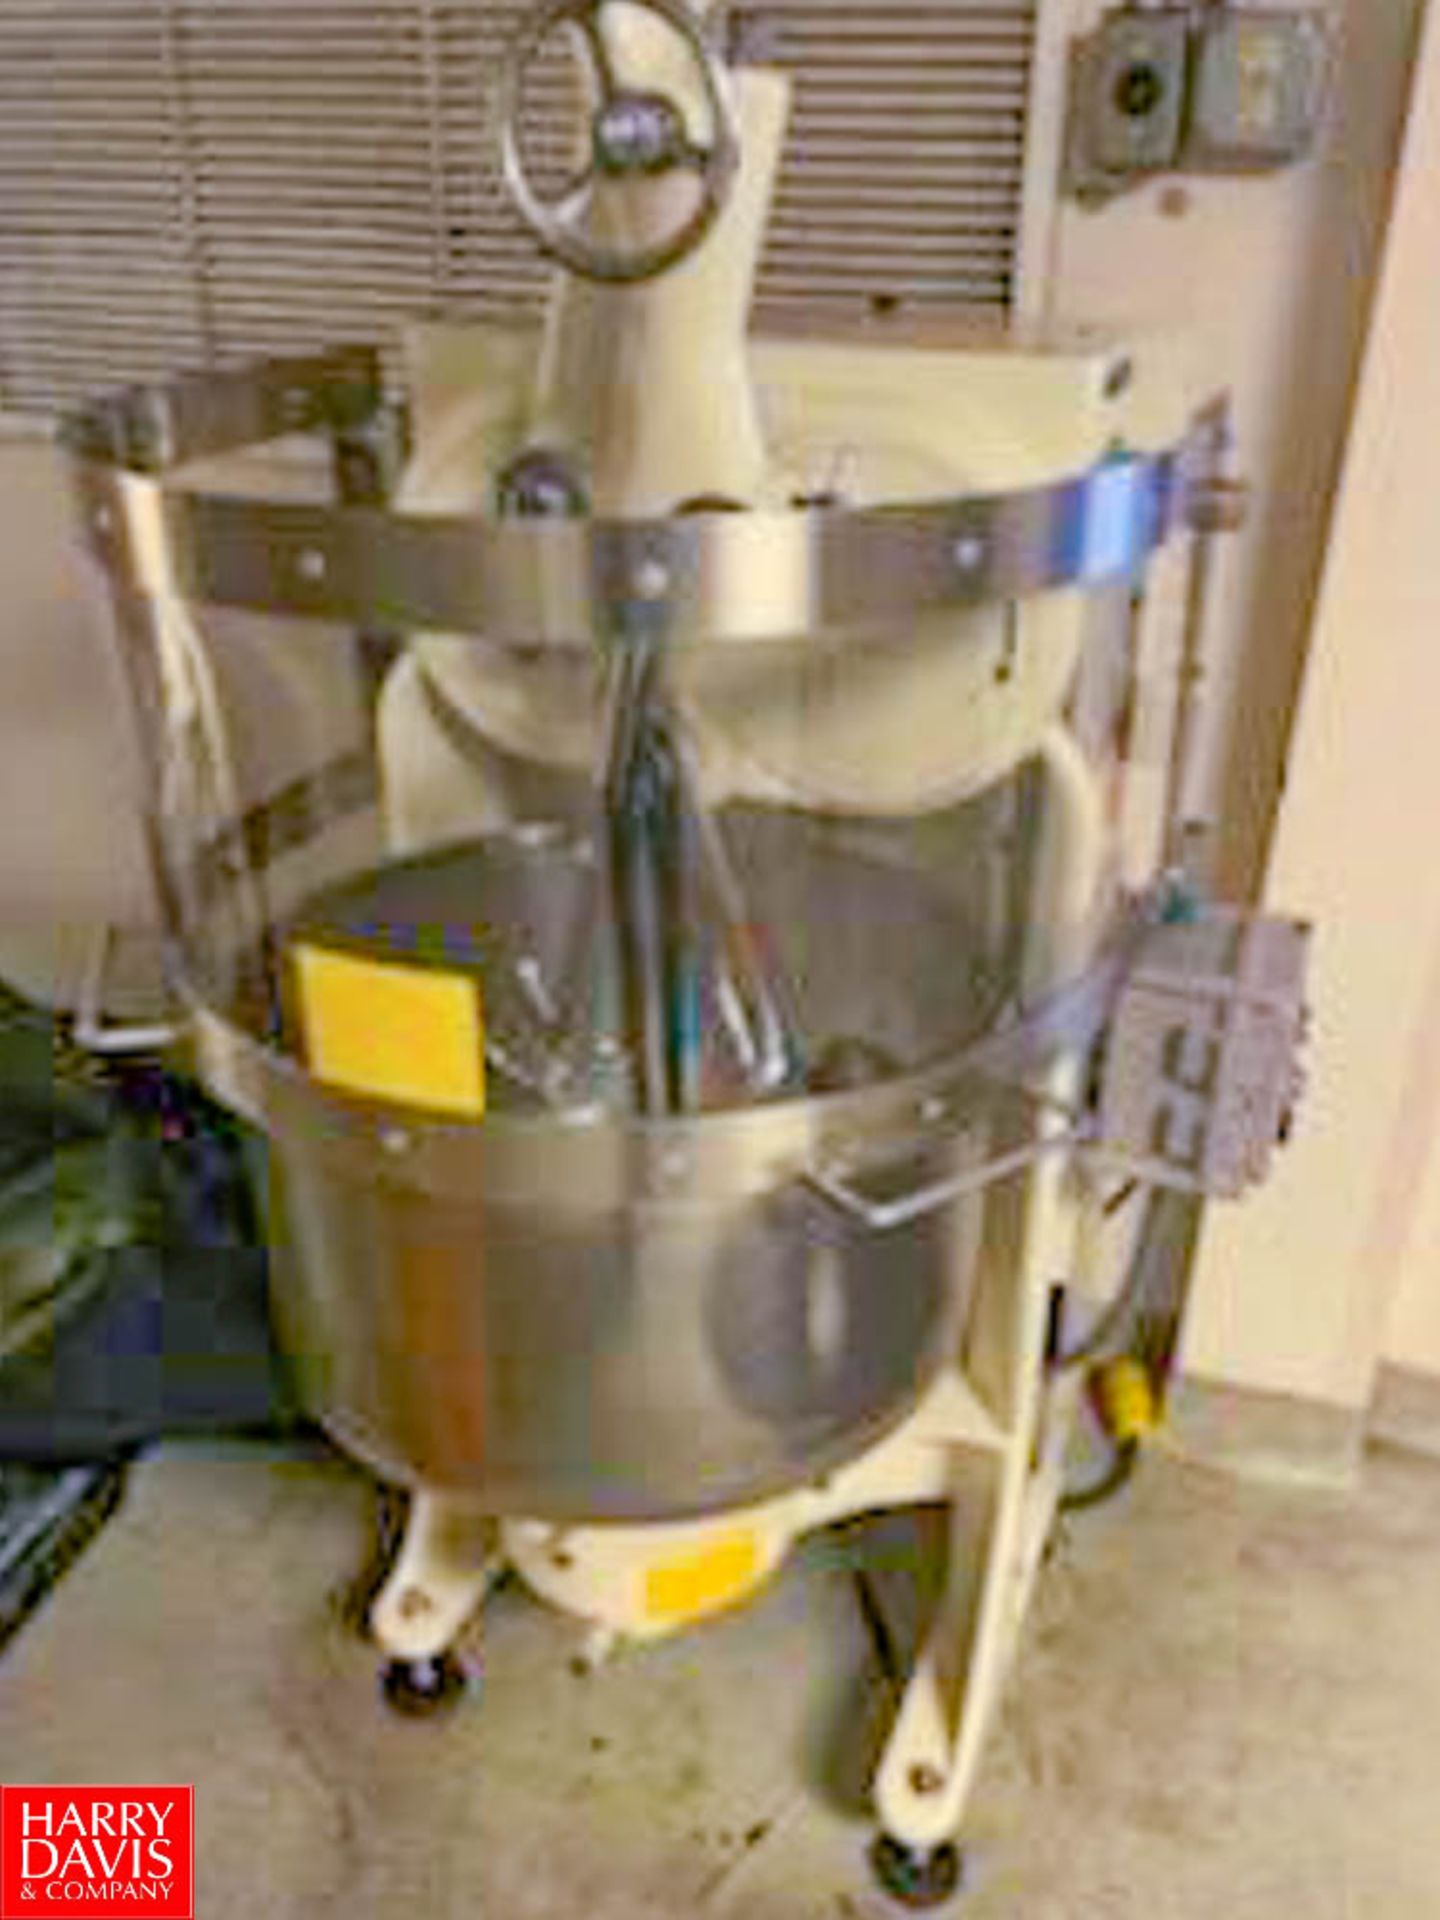 Excellent Artofex Double Arm Mixer, Model PF-4 Low Hour, R&D, SN: 271015 - Rigging Fee: $150